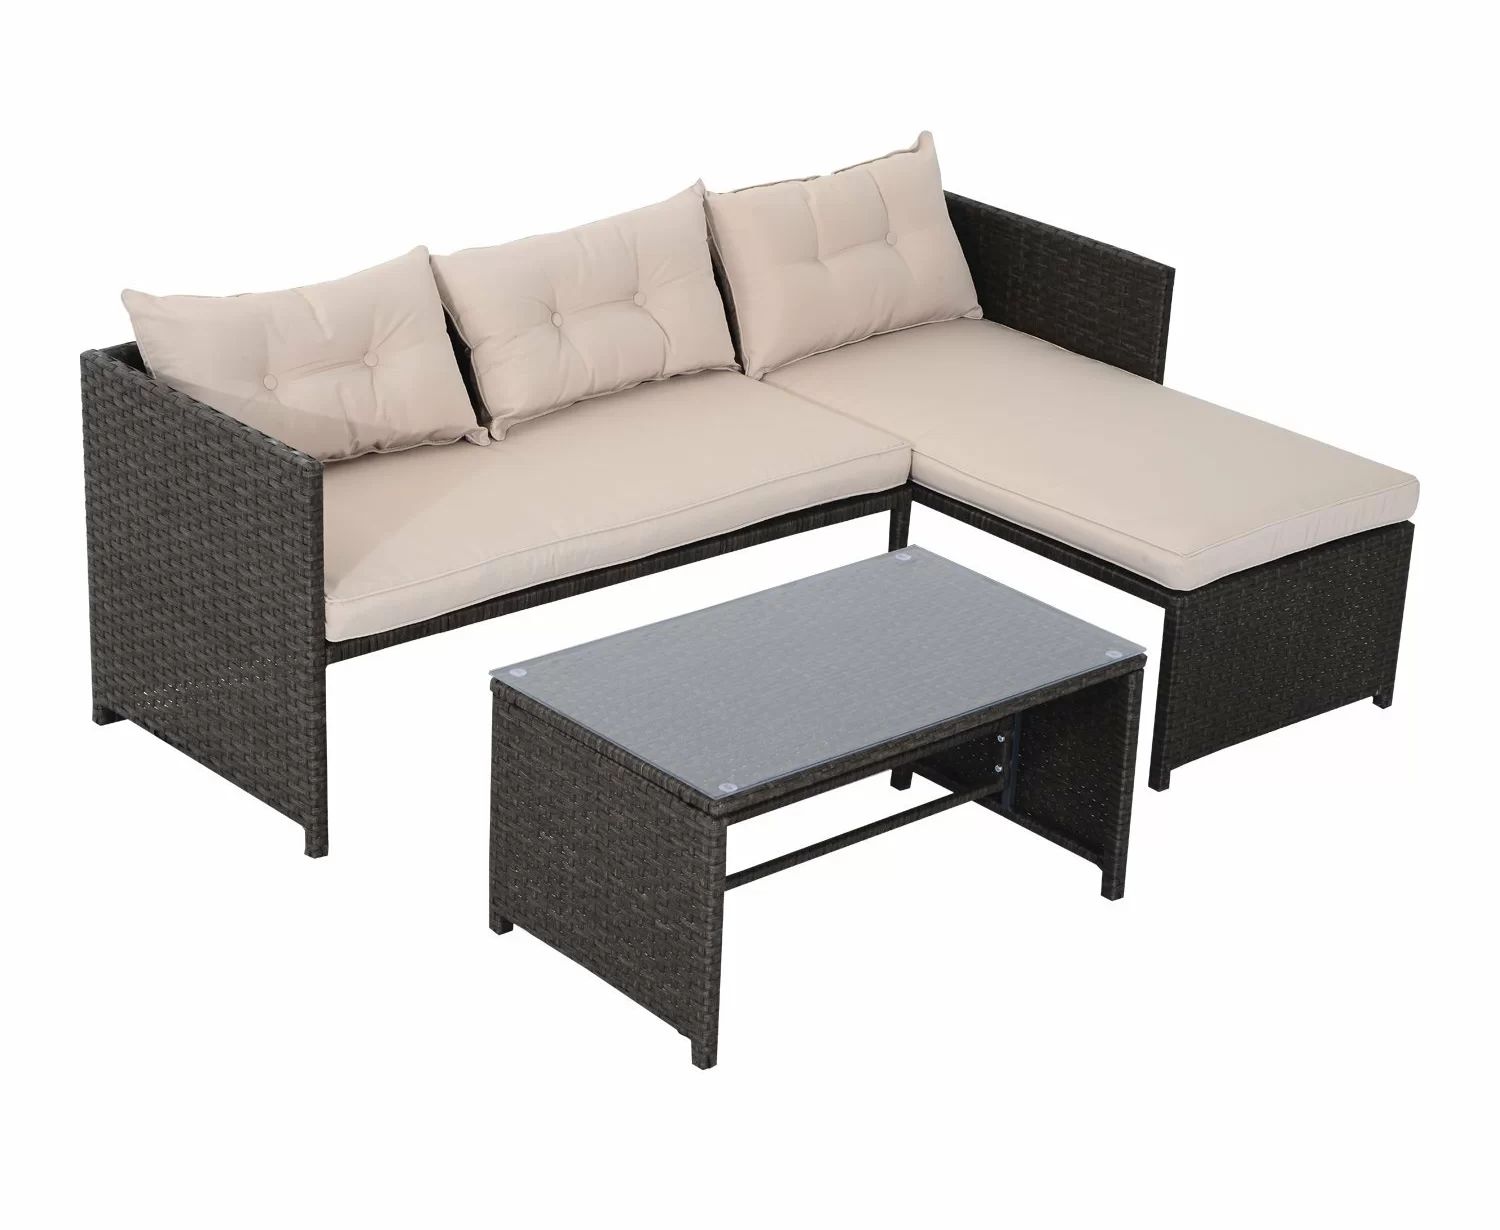 Swingle Wicker/Rattan 3 - Person Seating Group with Cushions | Wayfair North America